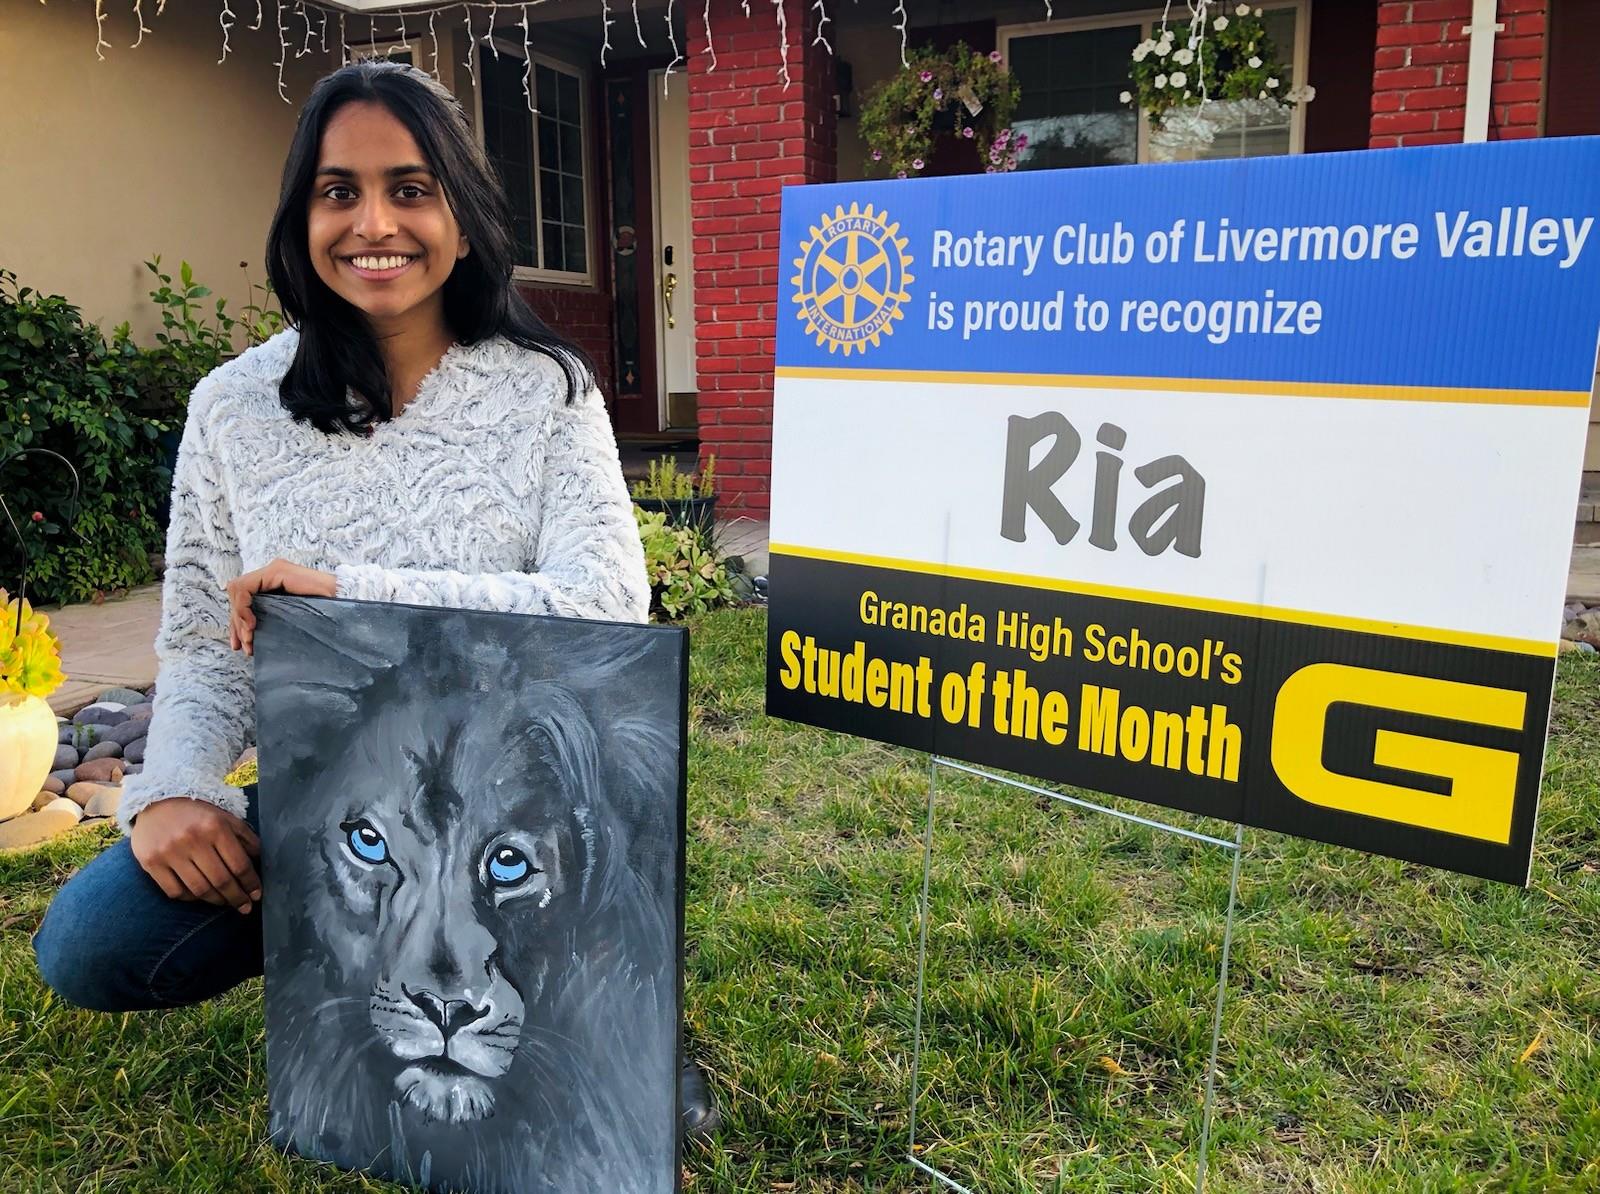 Student of the Month Ria